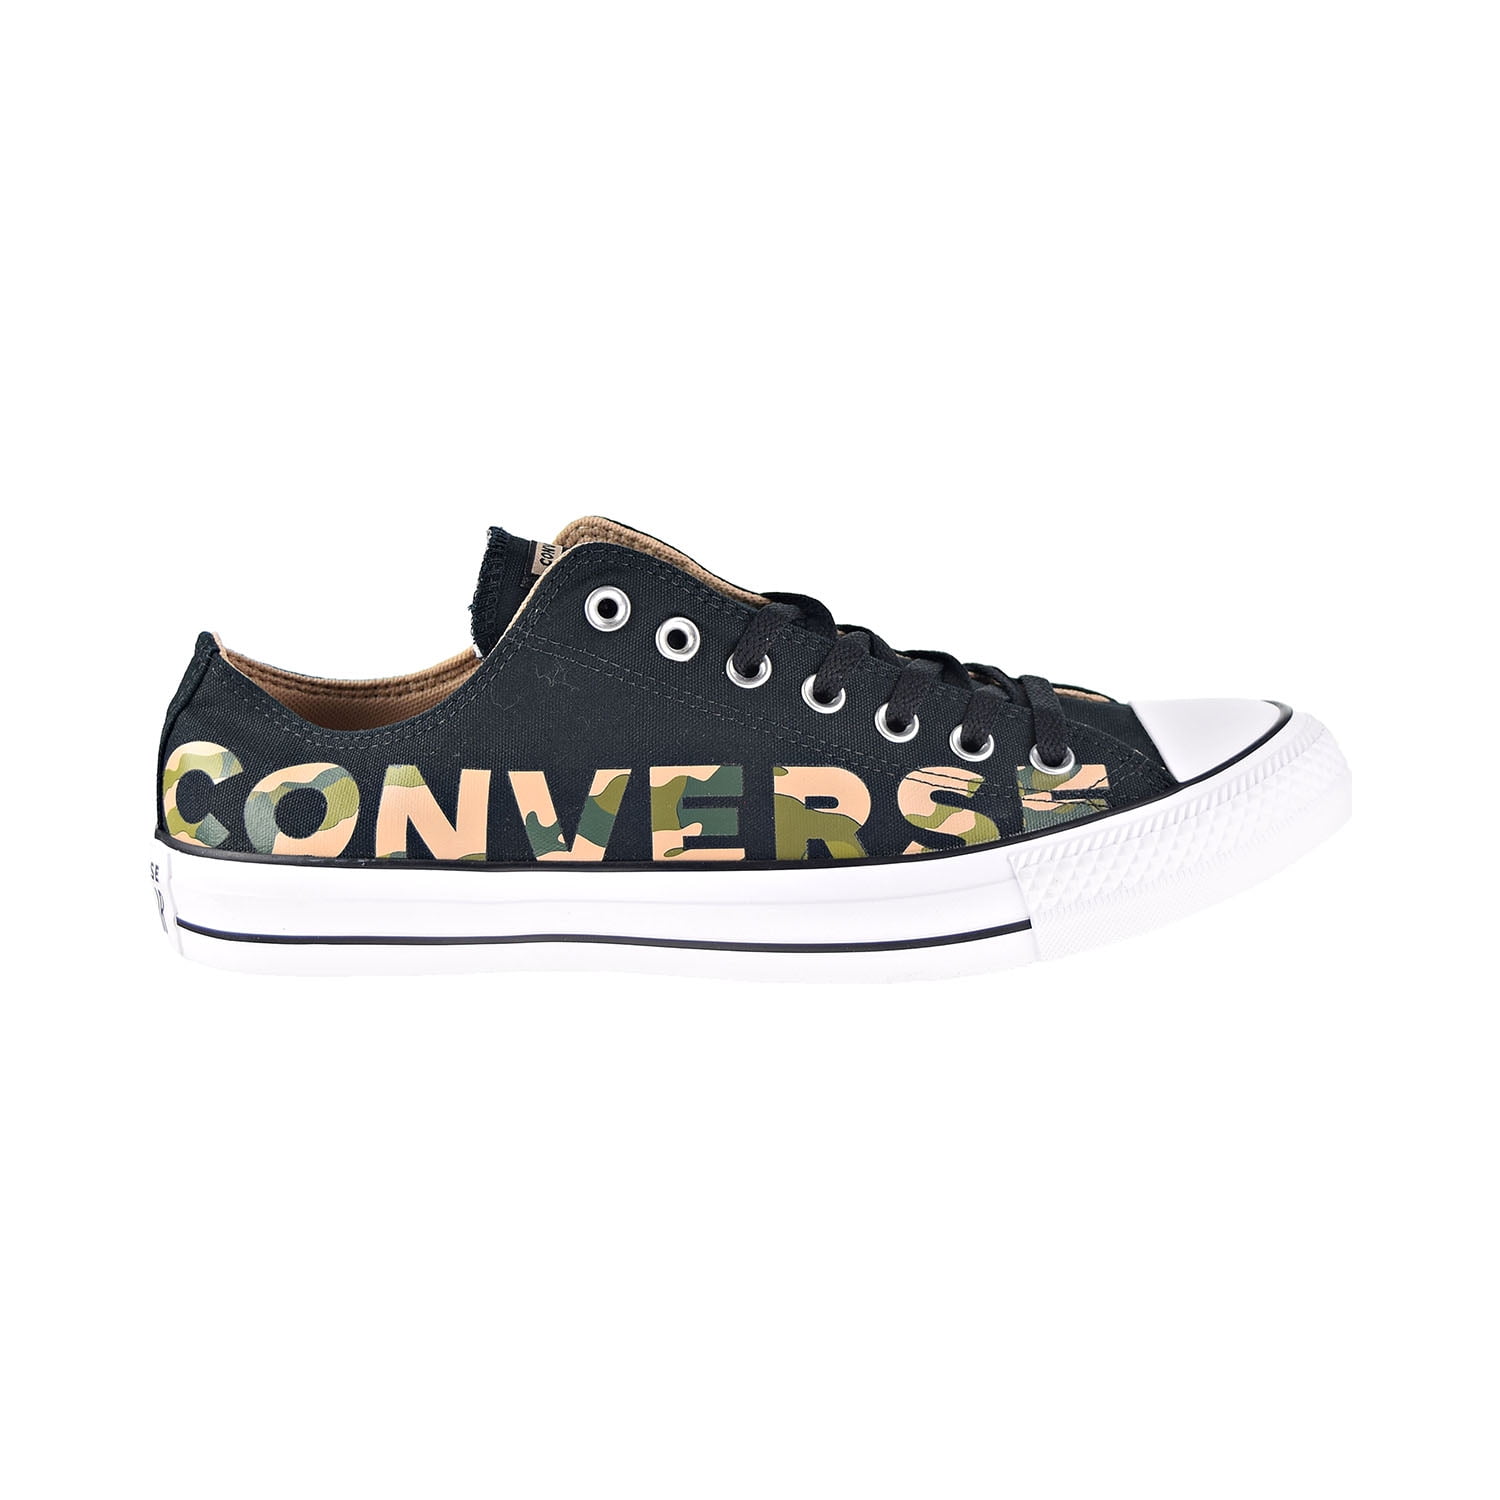 converse men's chuck taylor all star ox amp cloth casual sneakers